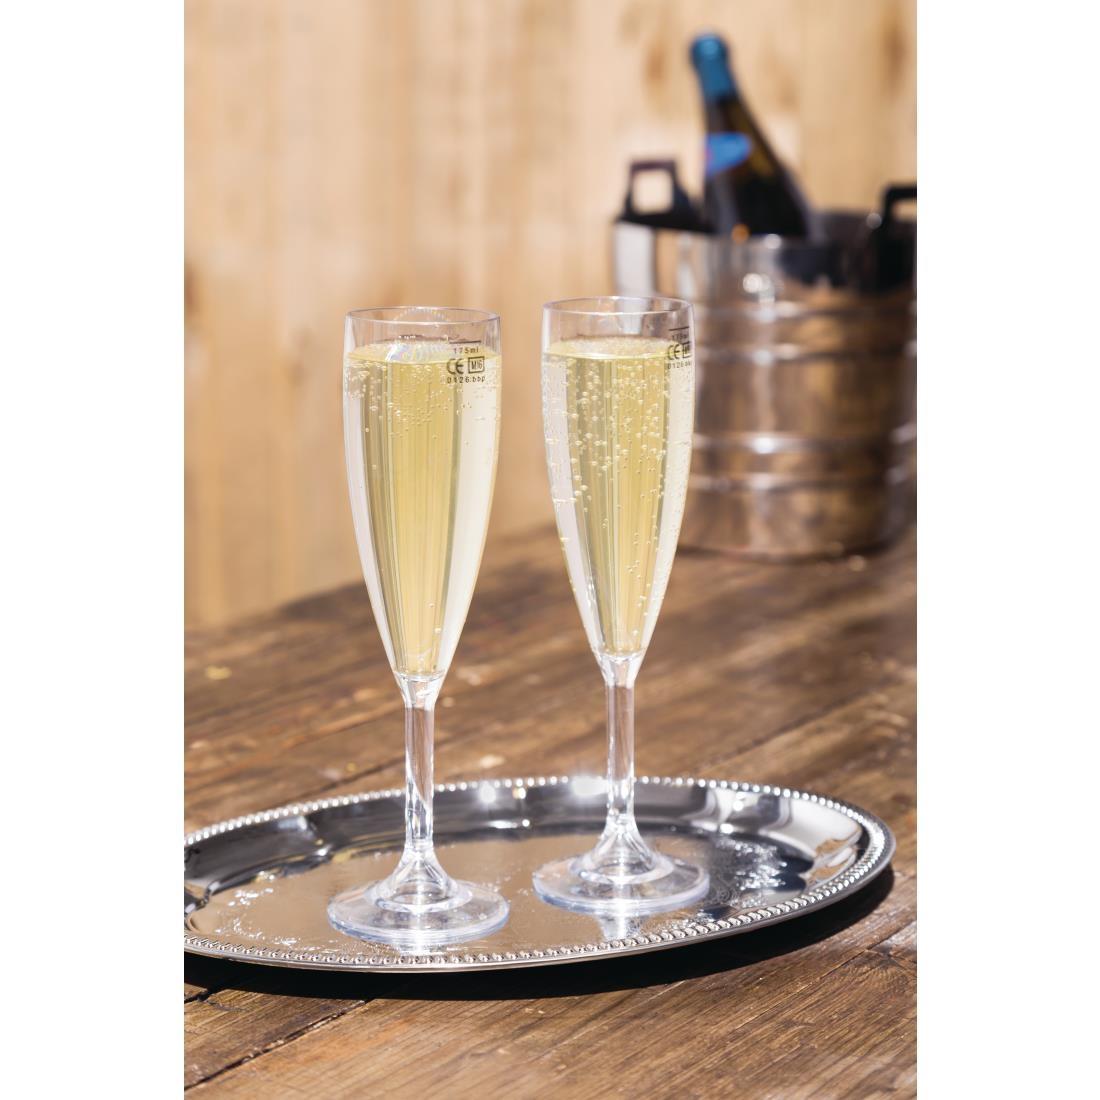 BBP Polycarbonate Champagne Flutes 200ml CE Marked at 175ml (Pack of 12) - CG945  - 2